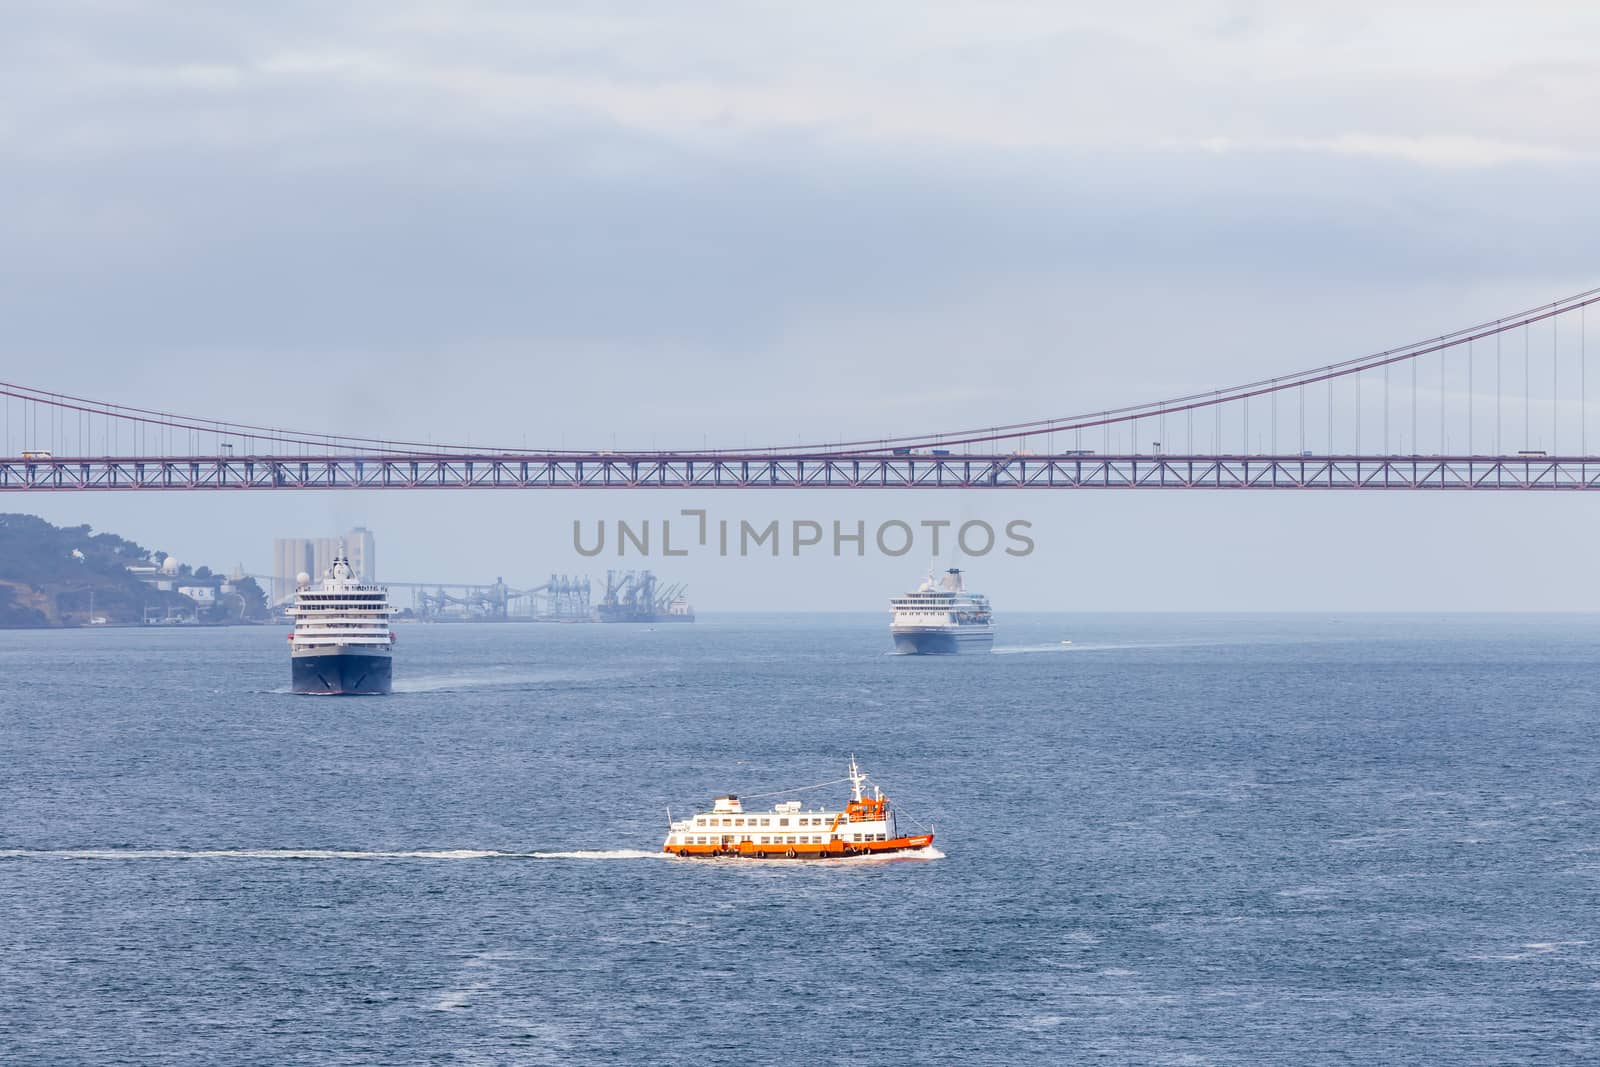 Ships and boats traverse the River Tagus beside the port of Lisbon in Portugal.